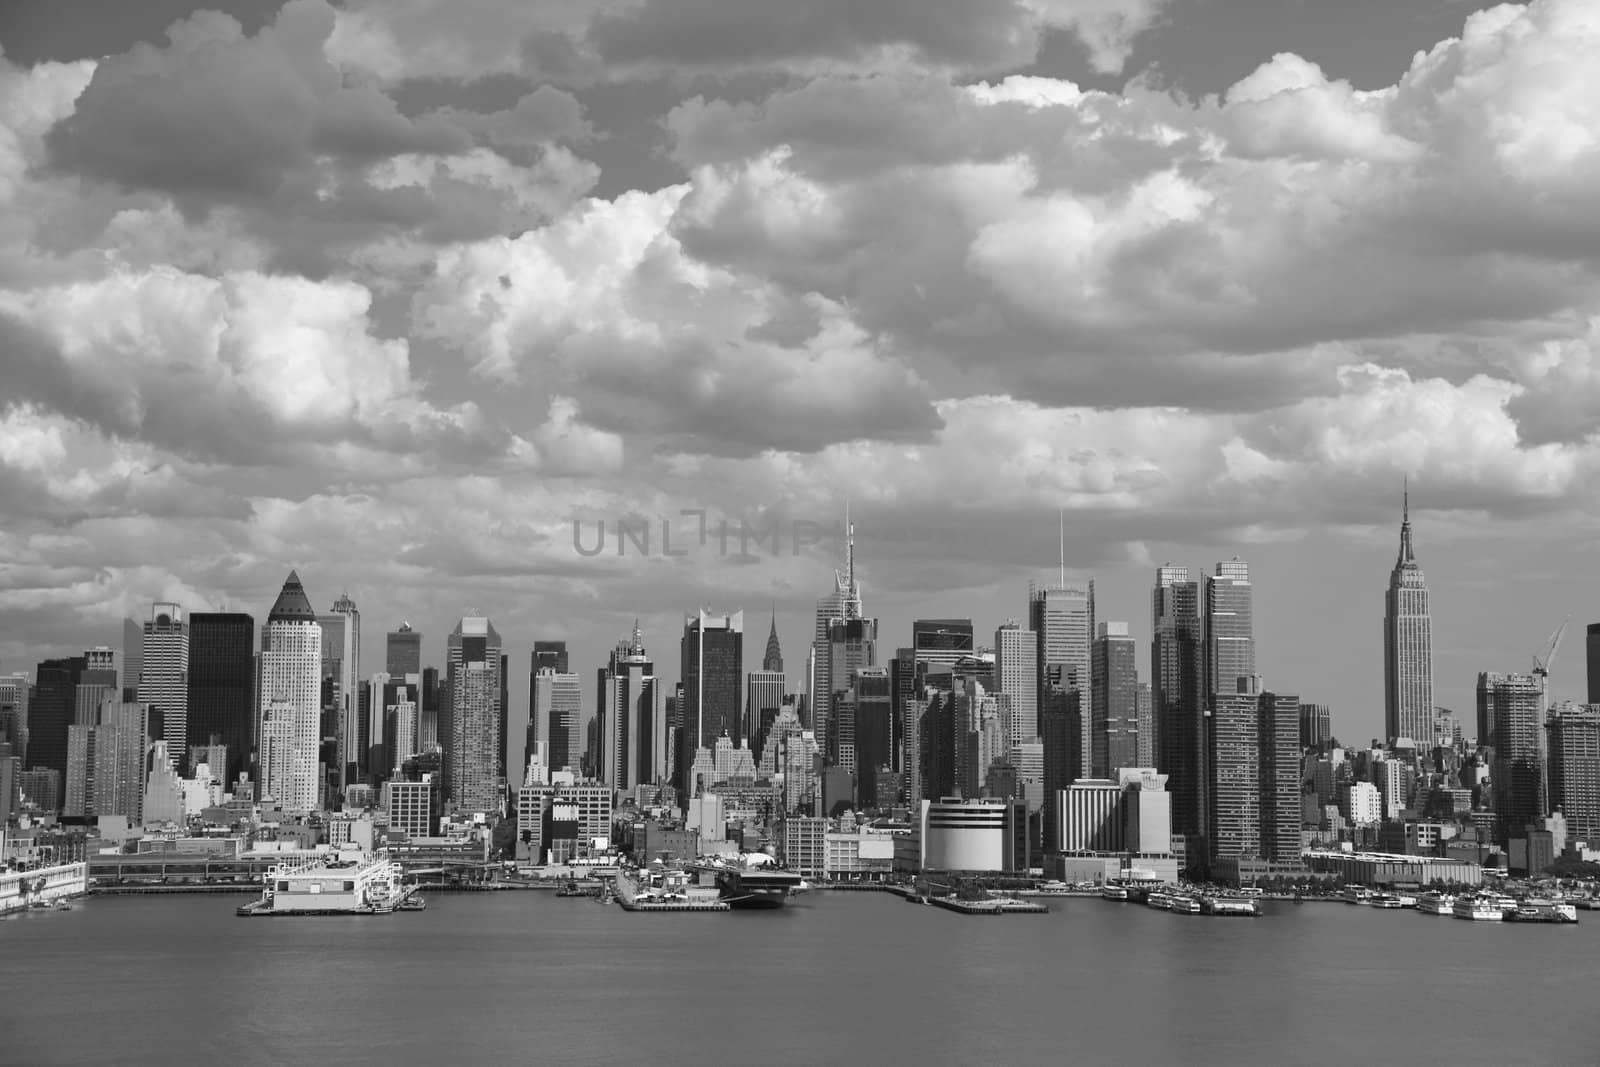 New York City Skyline - Black and White by Ffooter